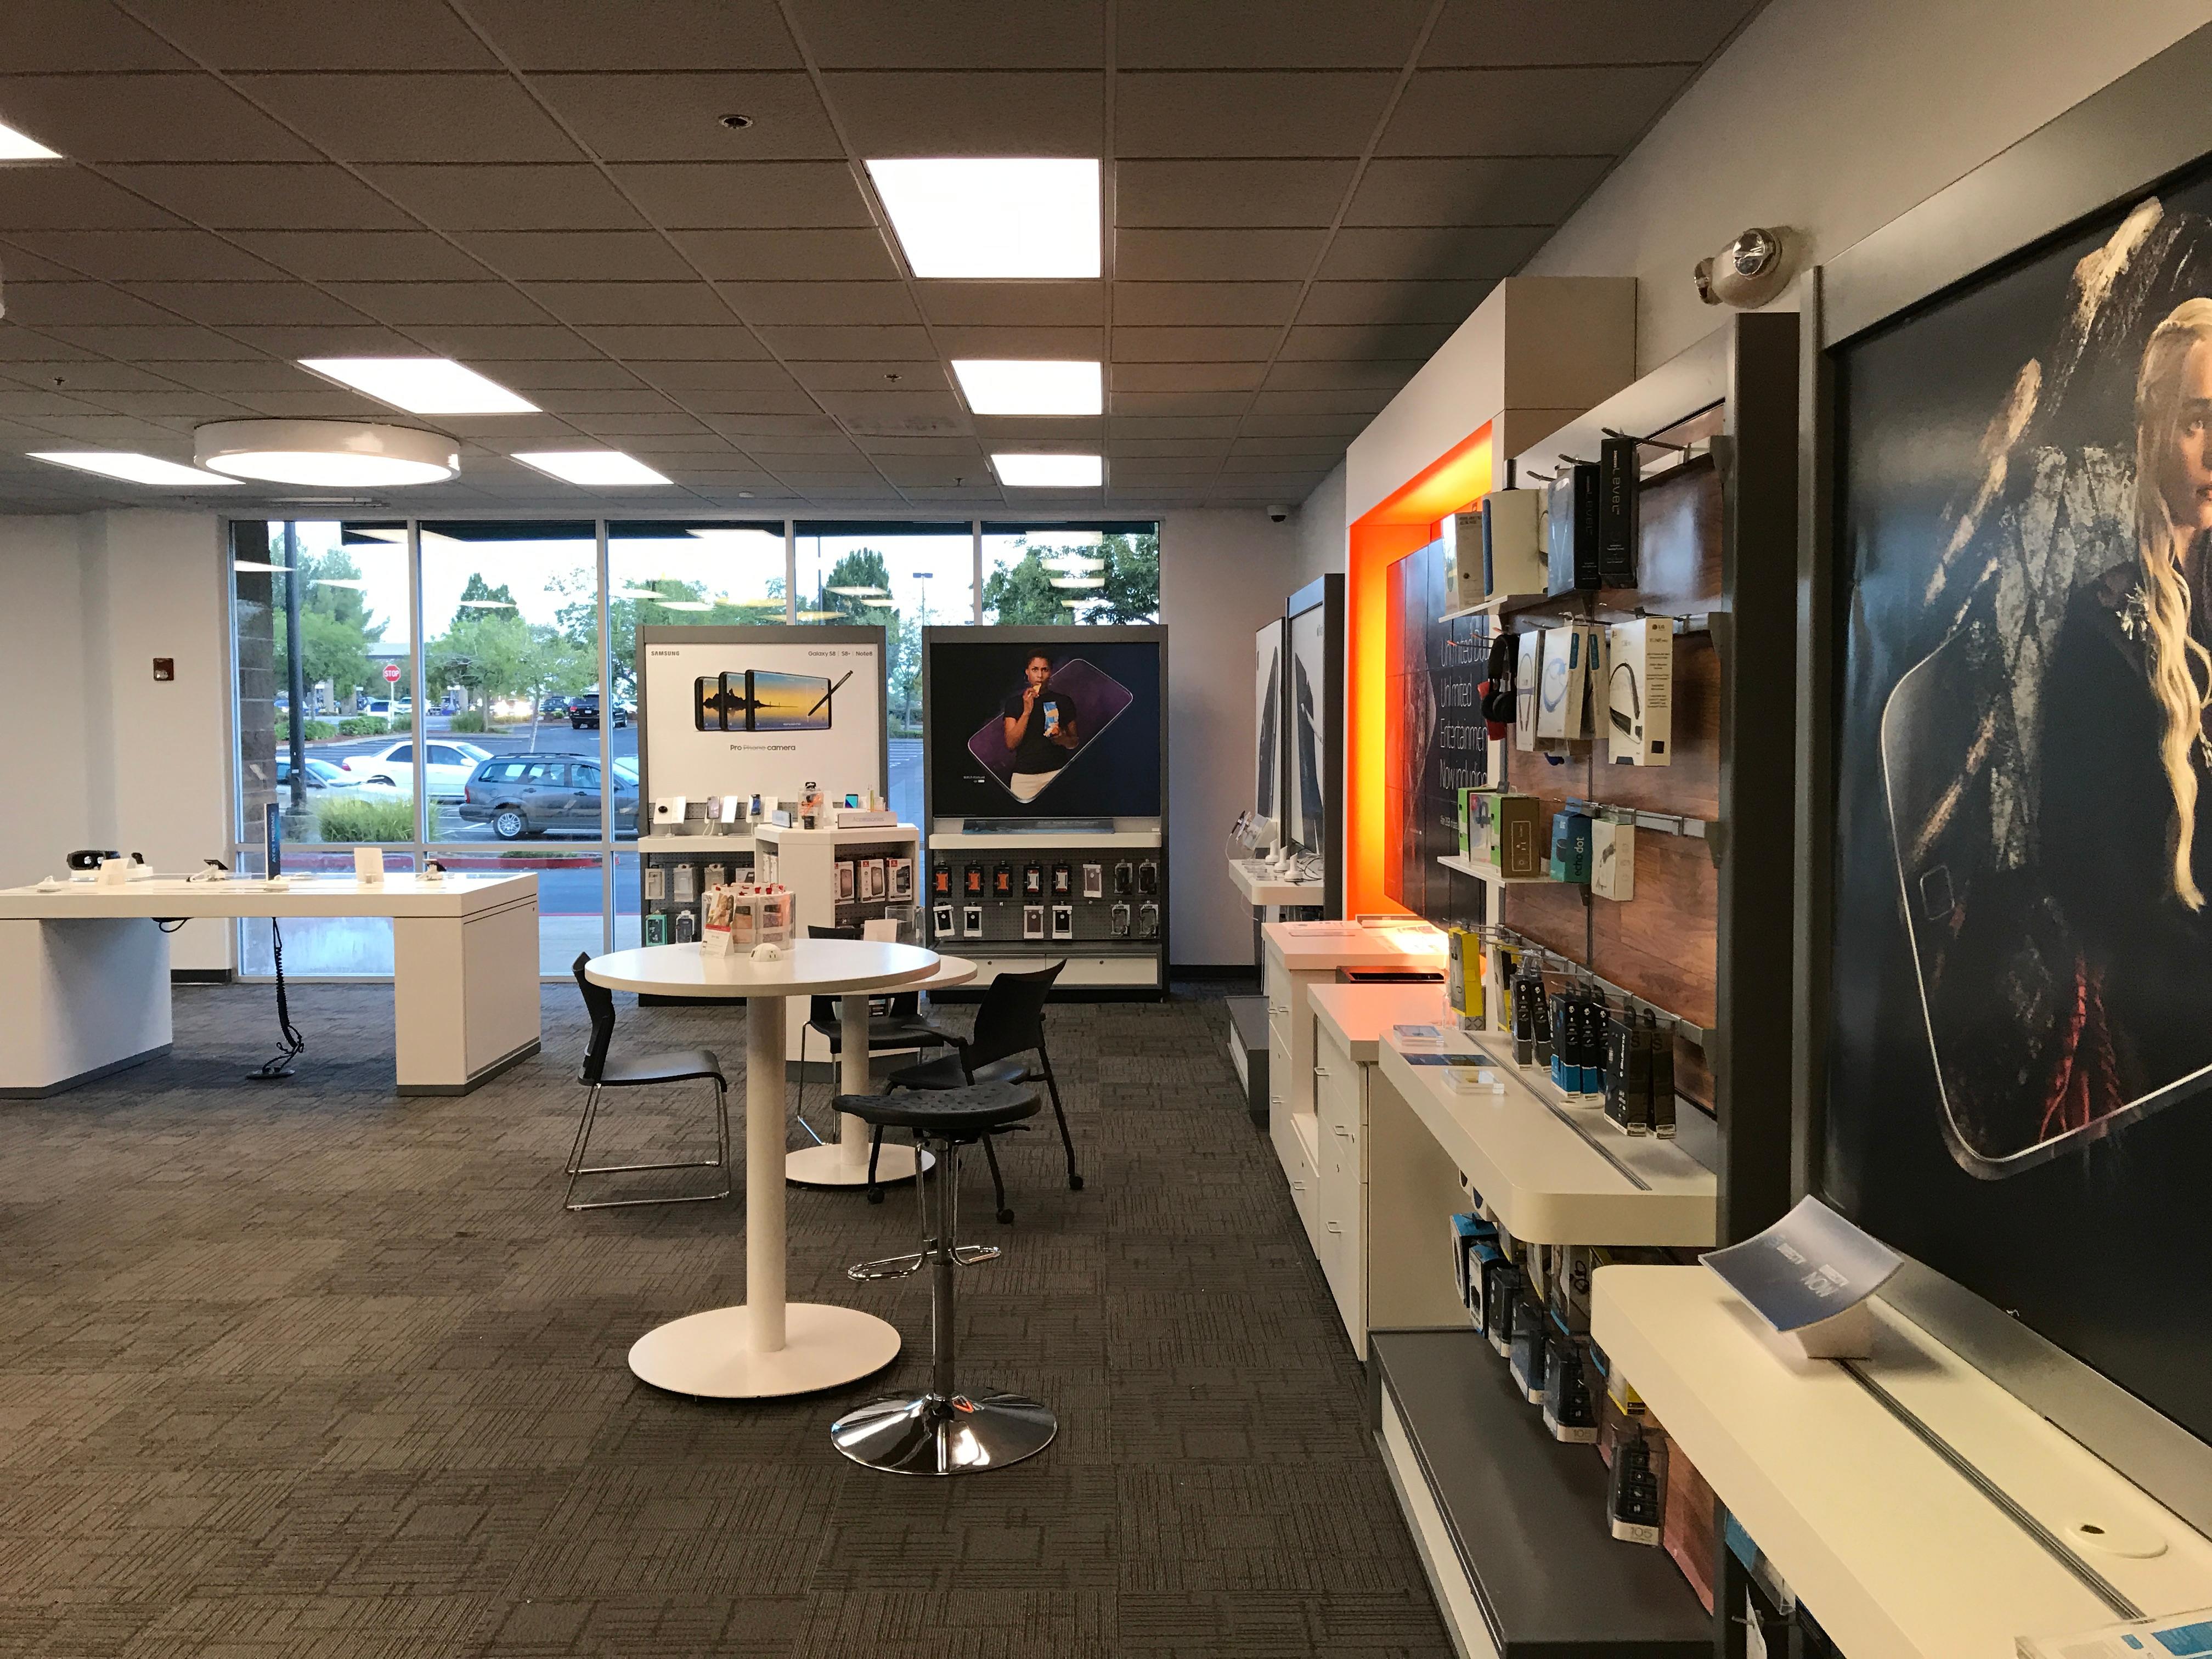 AT&T Store | 6726 Stanford Ranch Rd, Suite 1, Roseville, CA, 95678 | +1 (916) 780-5585